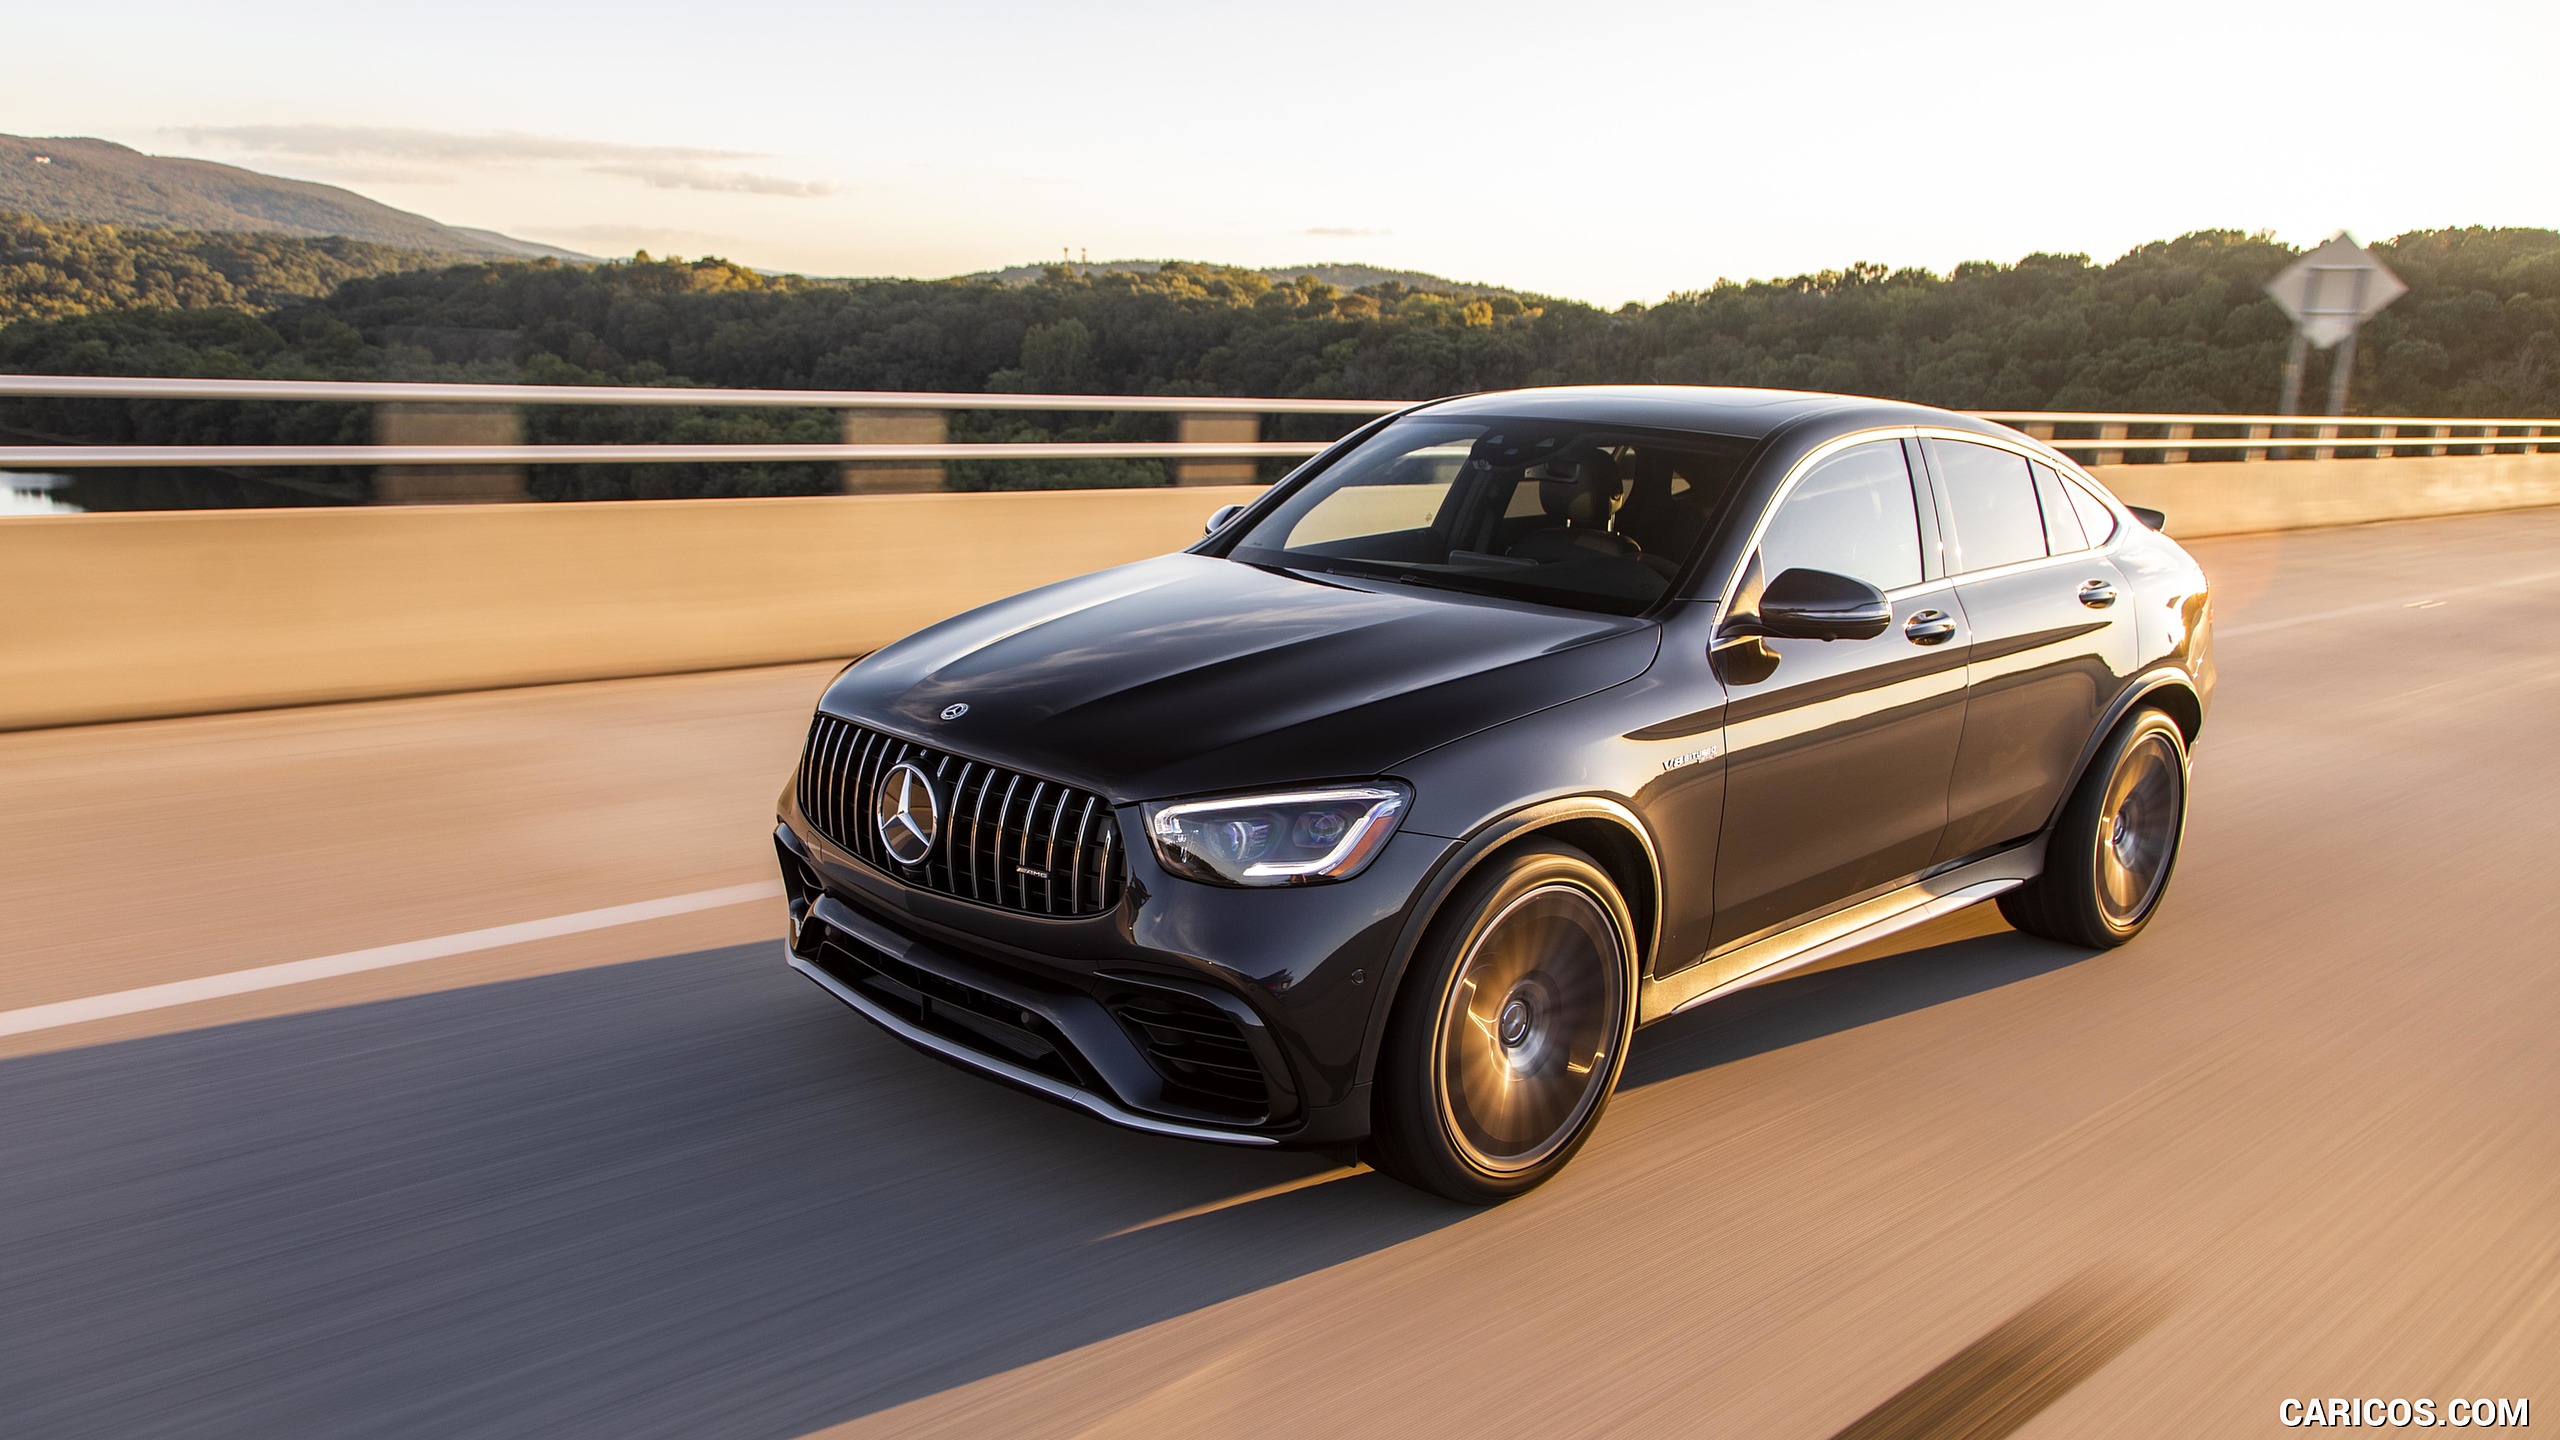 2020 Mercedes-AMG GLC 63 S Coupe (US-Spec) - Front Three-Quarter, #45 of 102